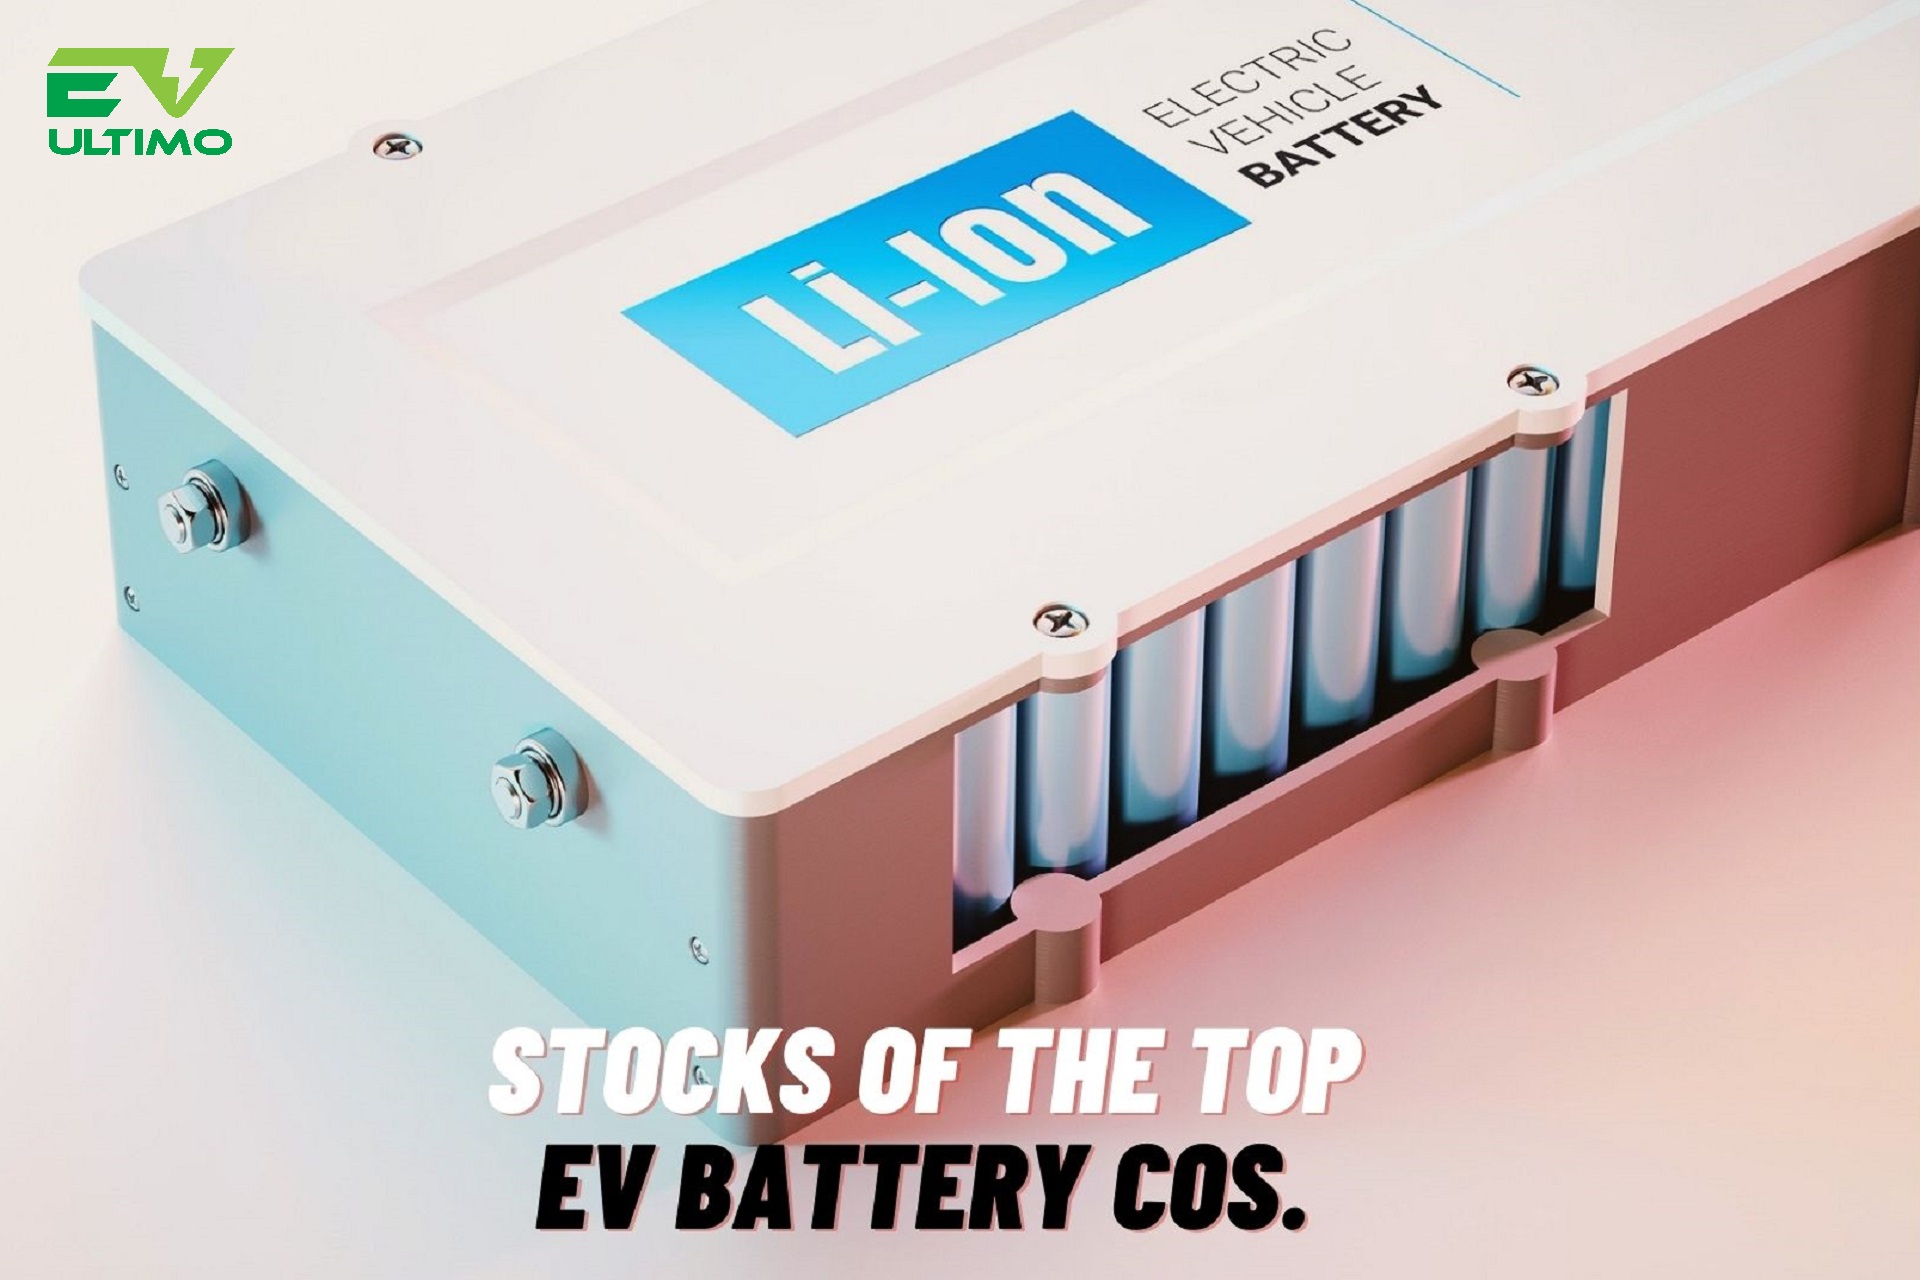 Looking For Best Stocks In EV Sector? Watch Episode #1 Of Our YouTube Series On Top Electric Battery Stocks